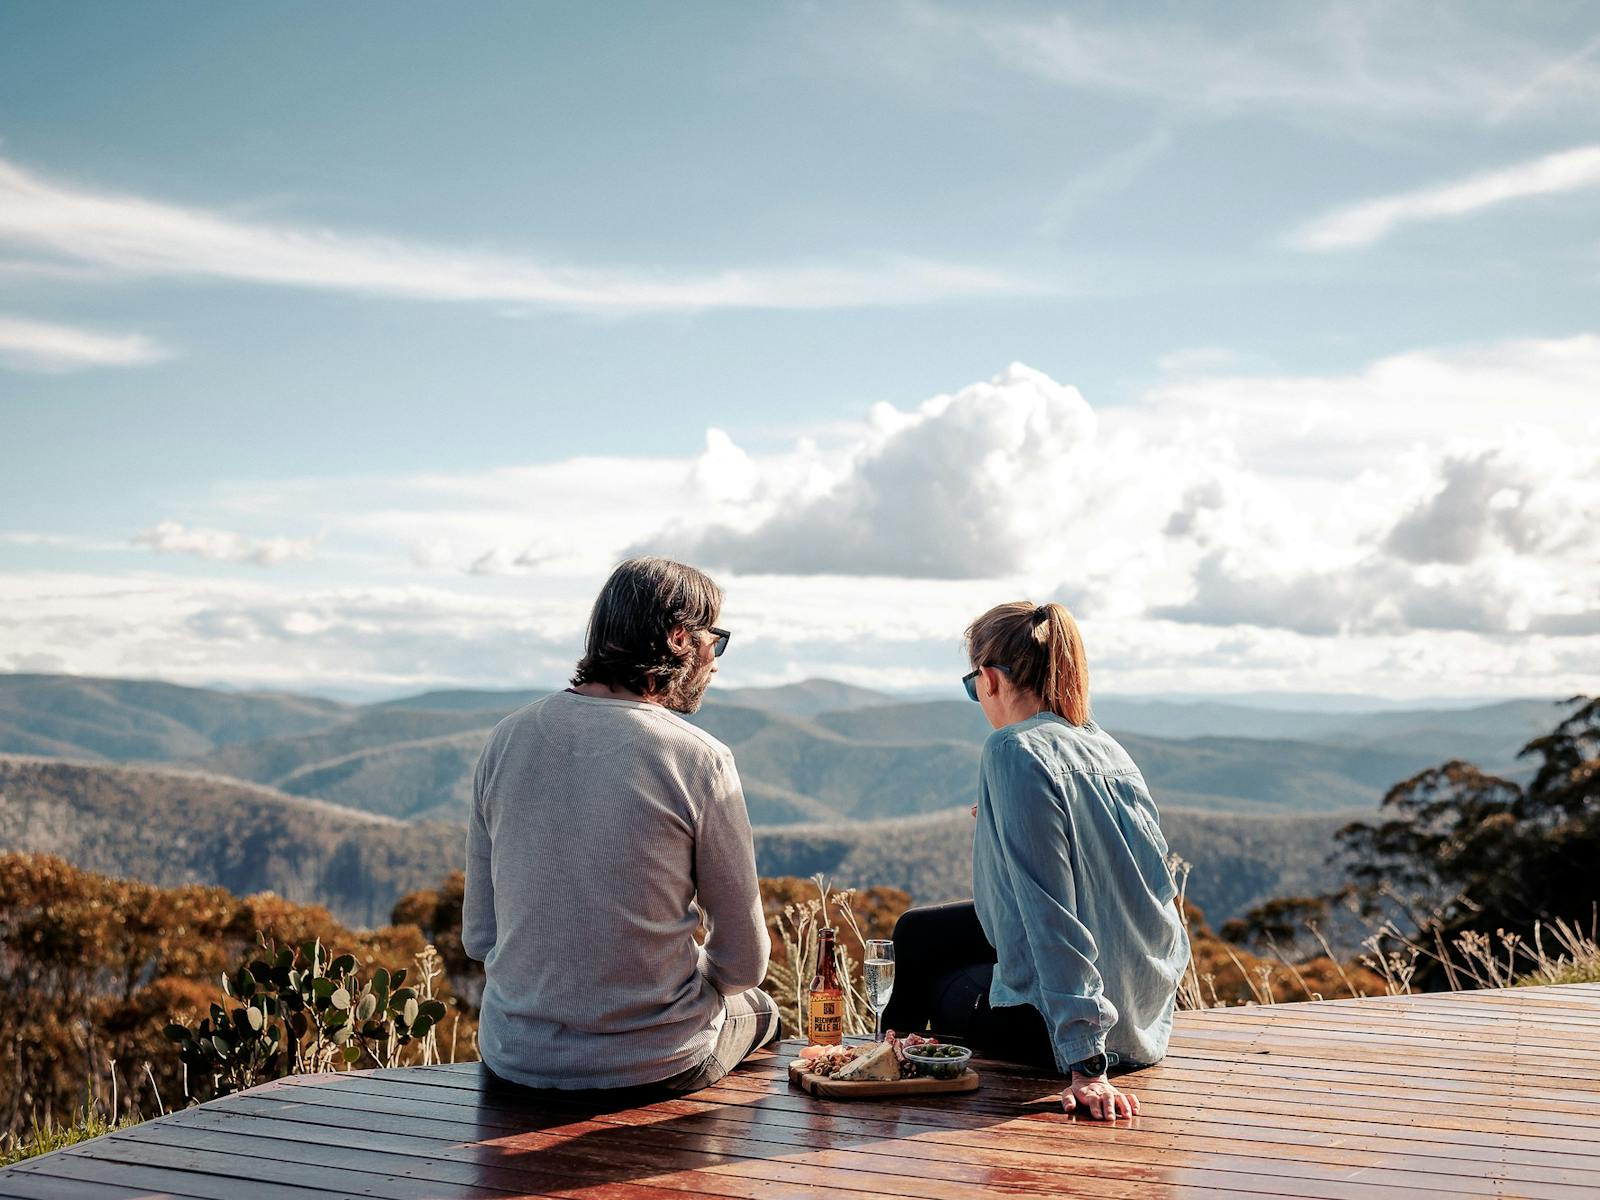 Afternoons at The General, Mt Hotham